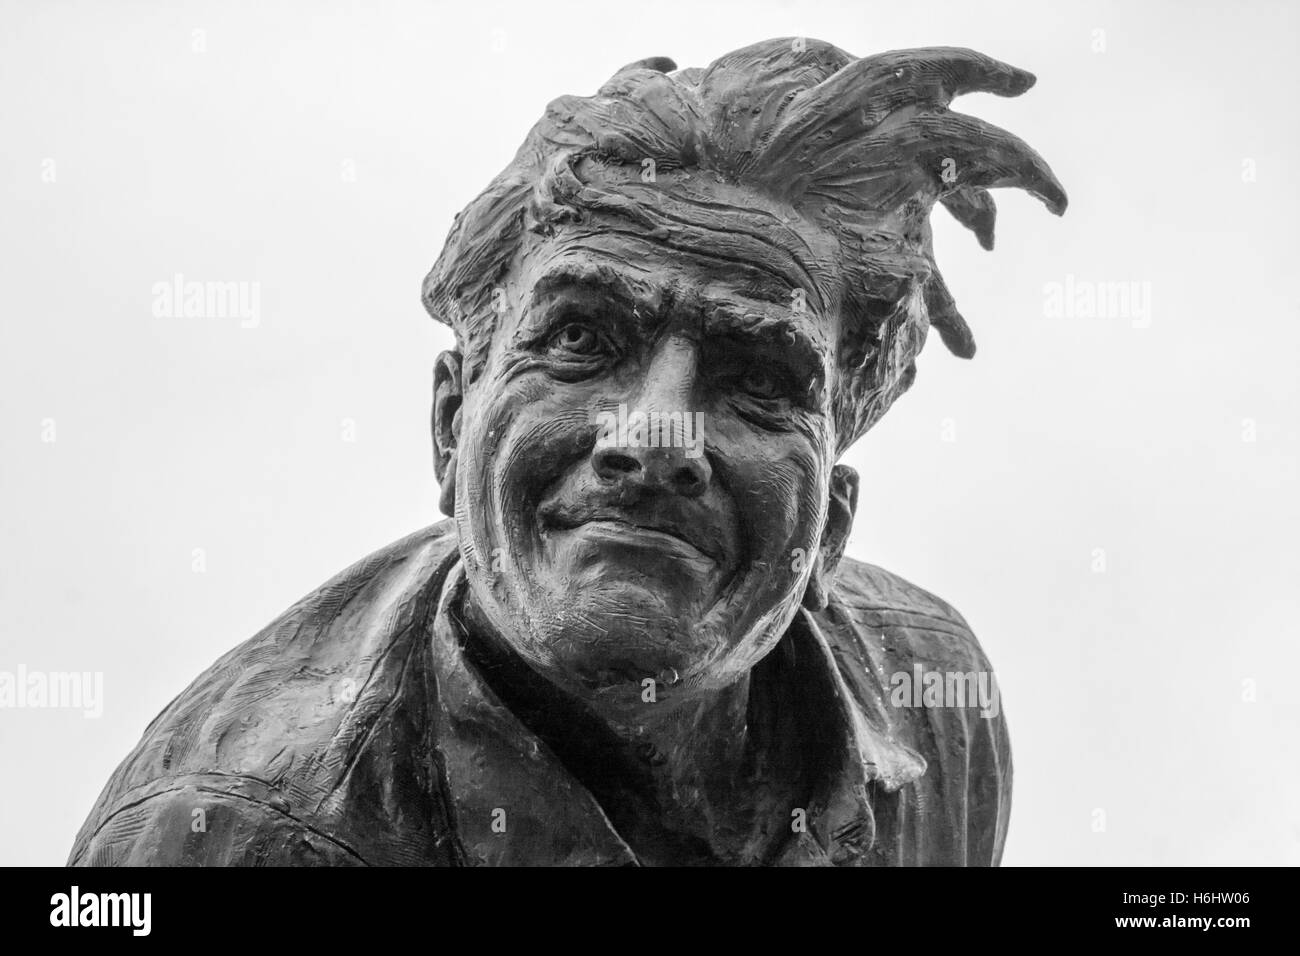 A close-up of the statue of former England cricketer,Freddie Trueman, which is situated at the  canal basin in Skipton Stock Photo